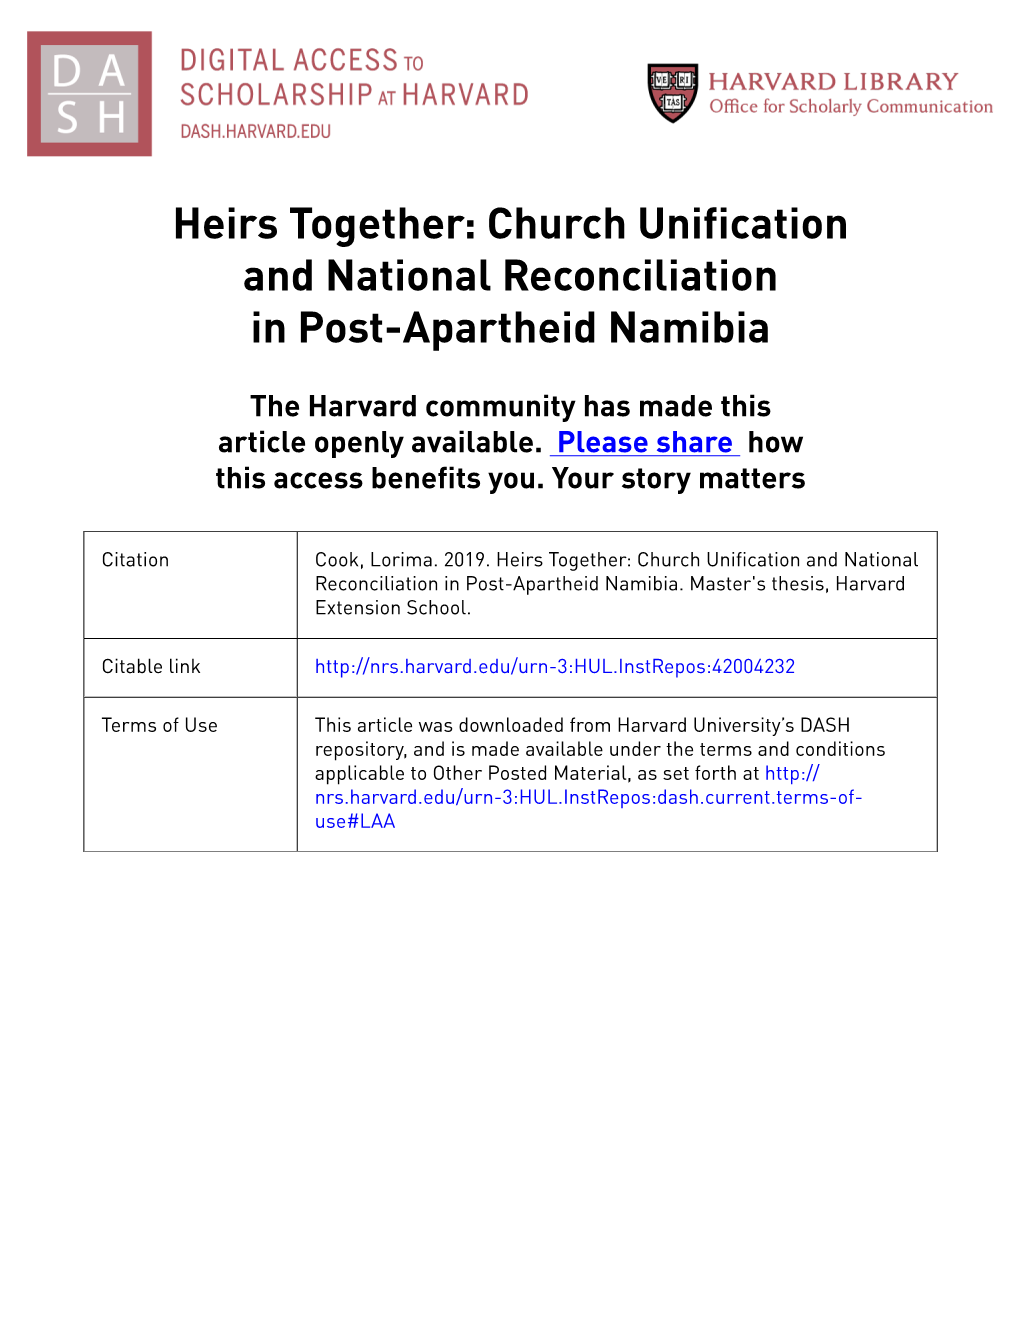 Church Unification and National Reconciliation in Post-Apartheid Namibia